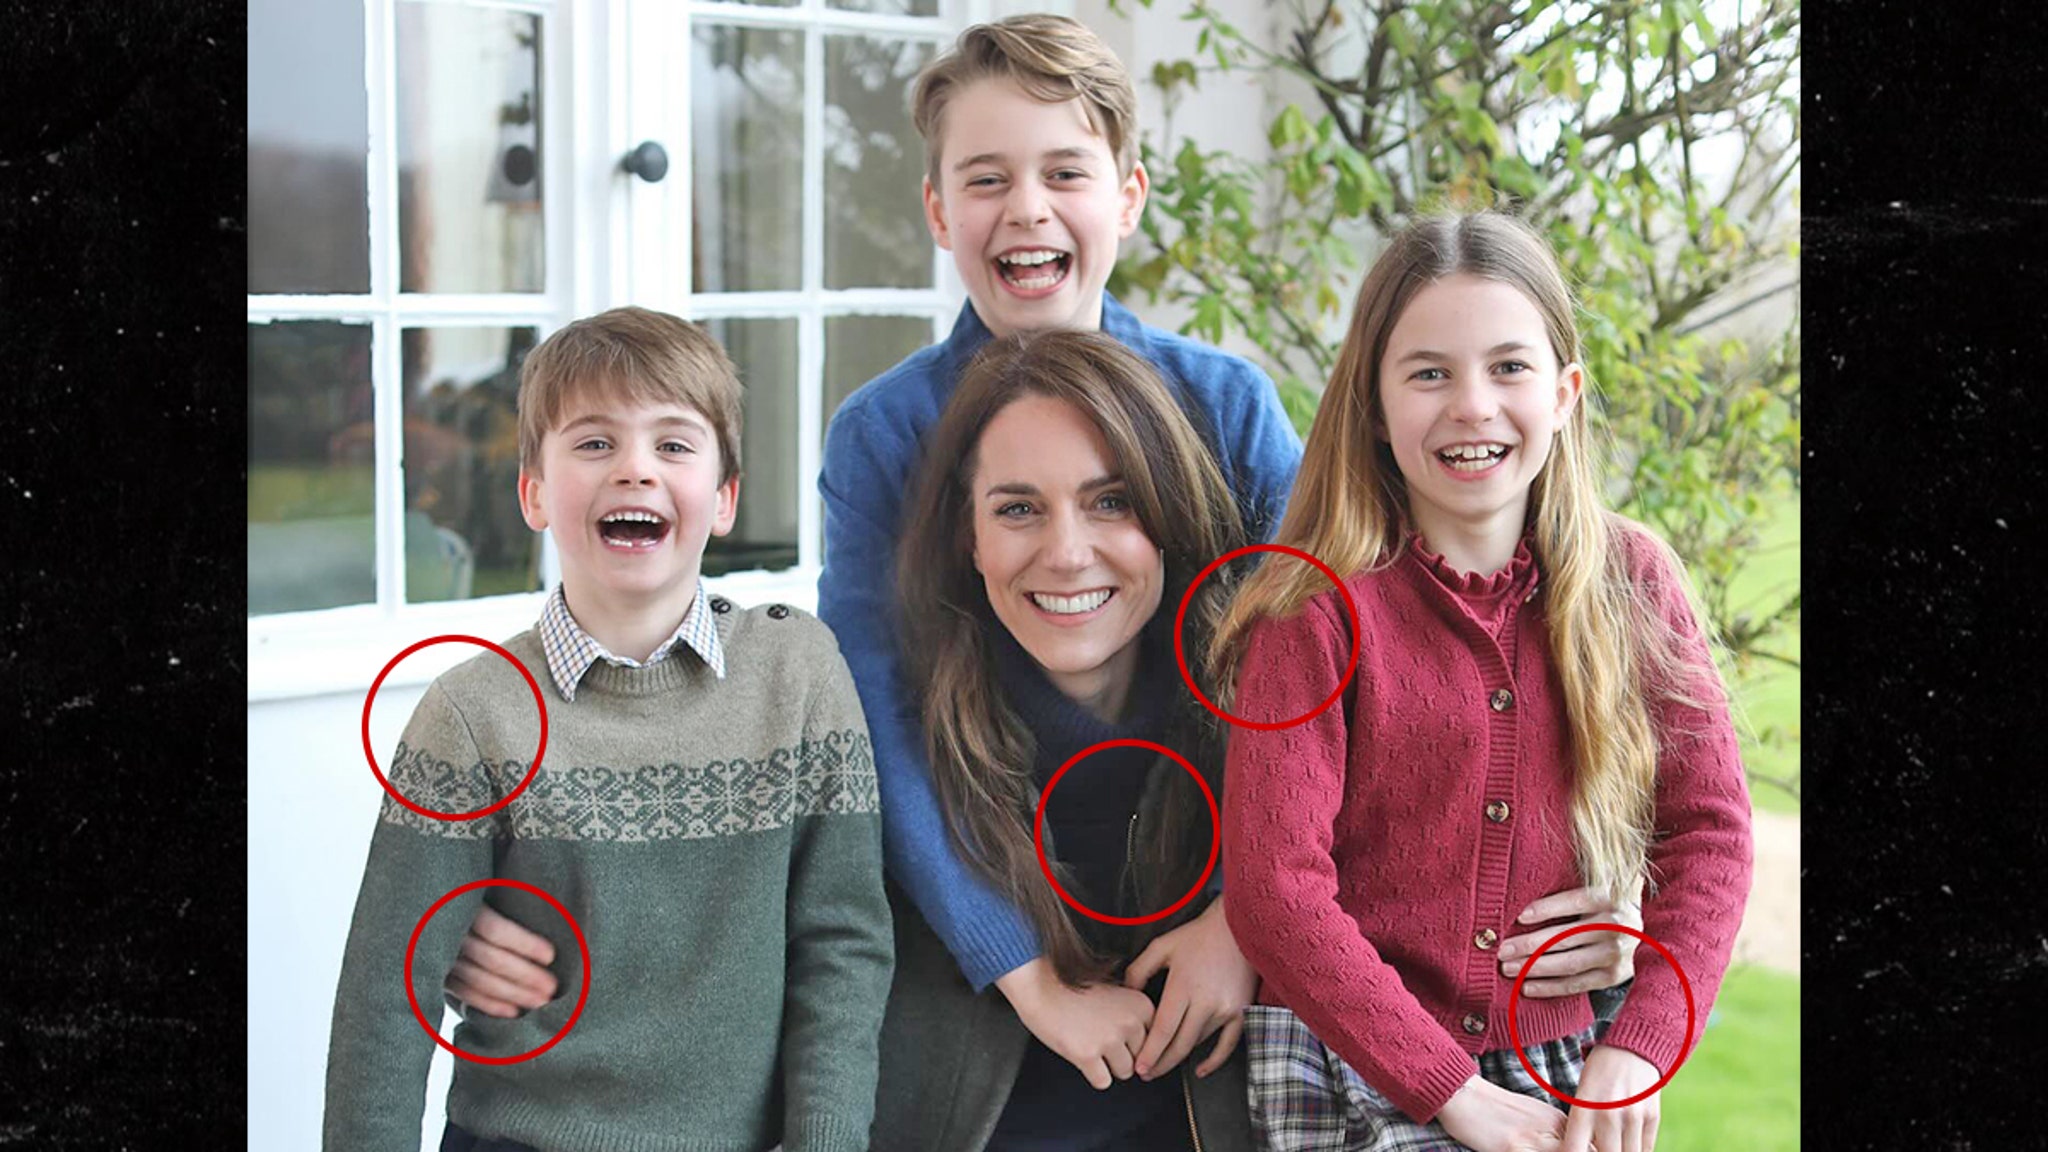 Kate Middleton Mother’s Day Pic, Photoshop Fail More Likely Than AI